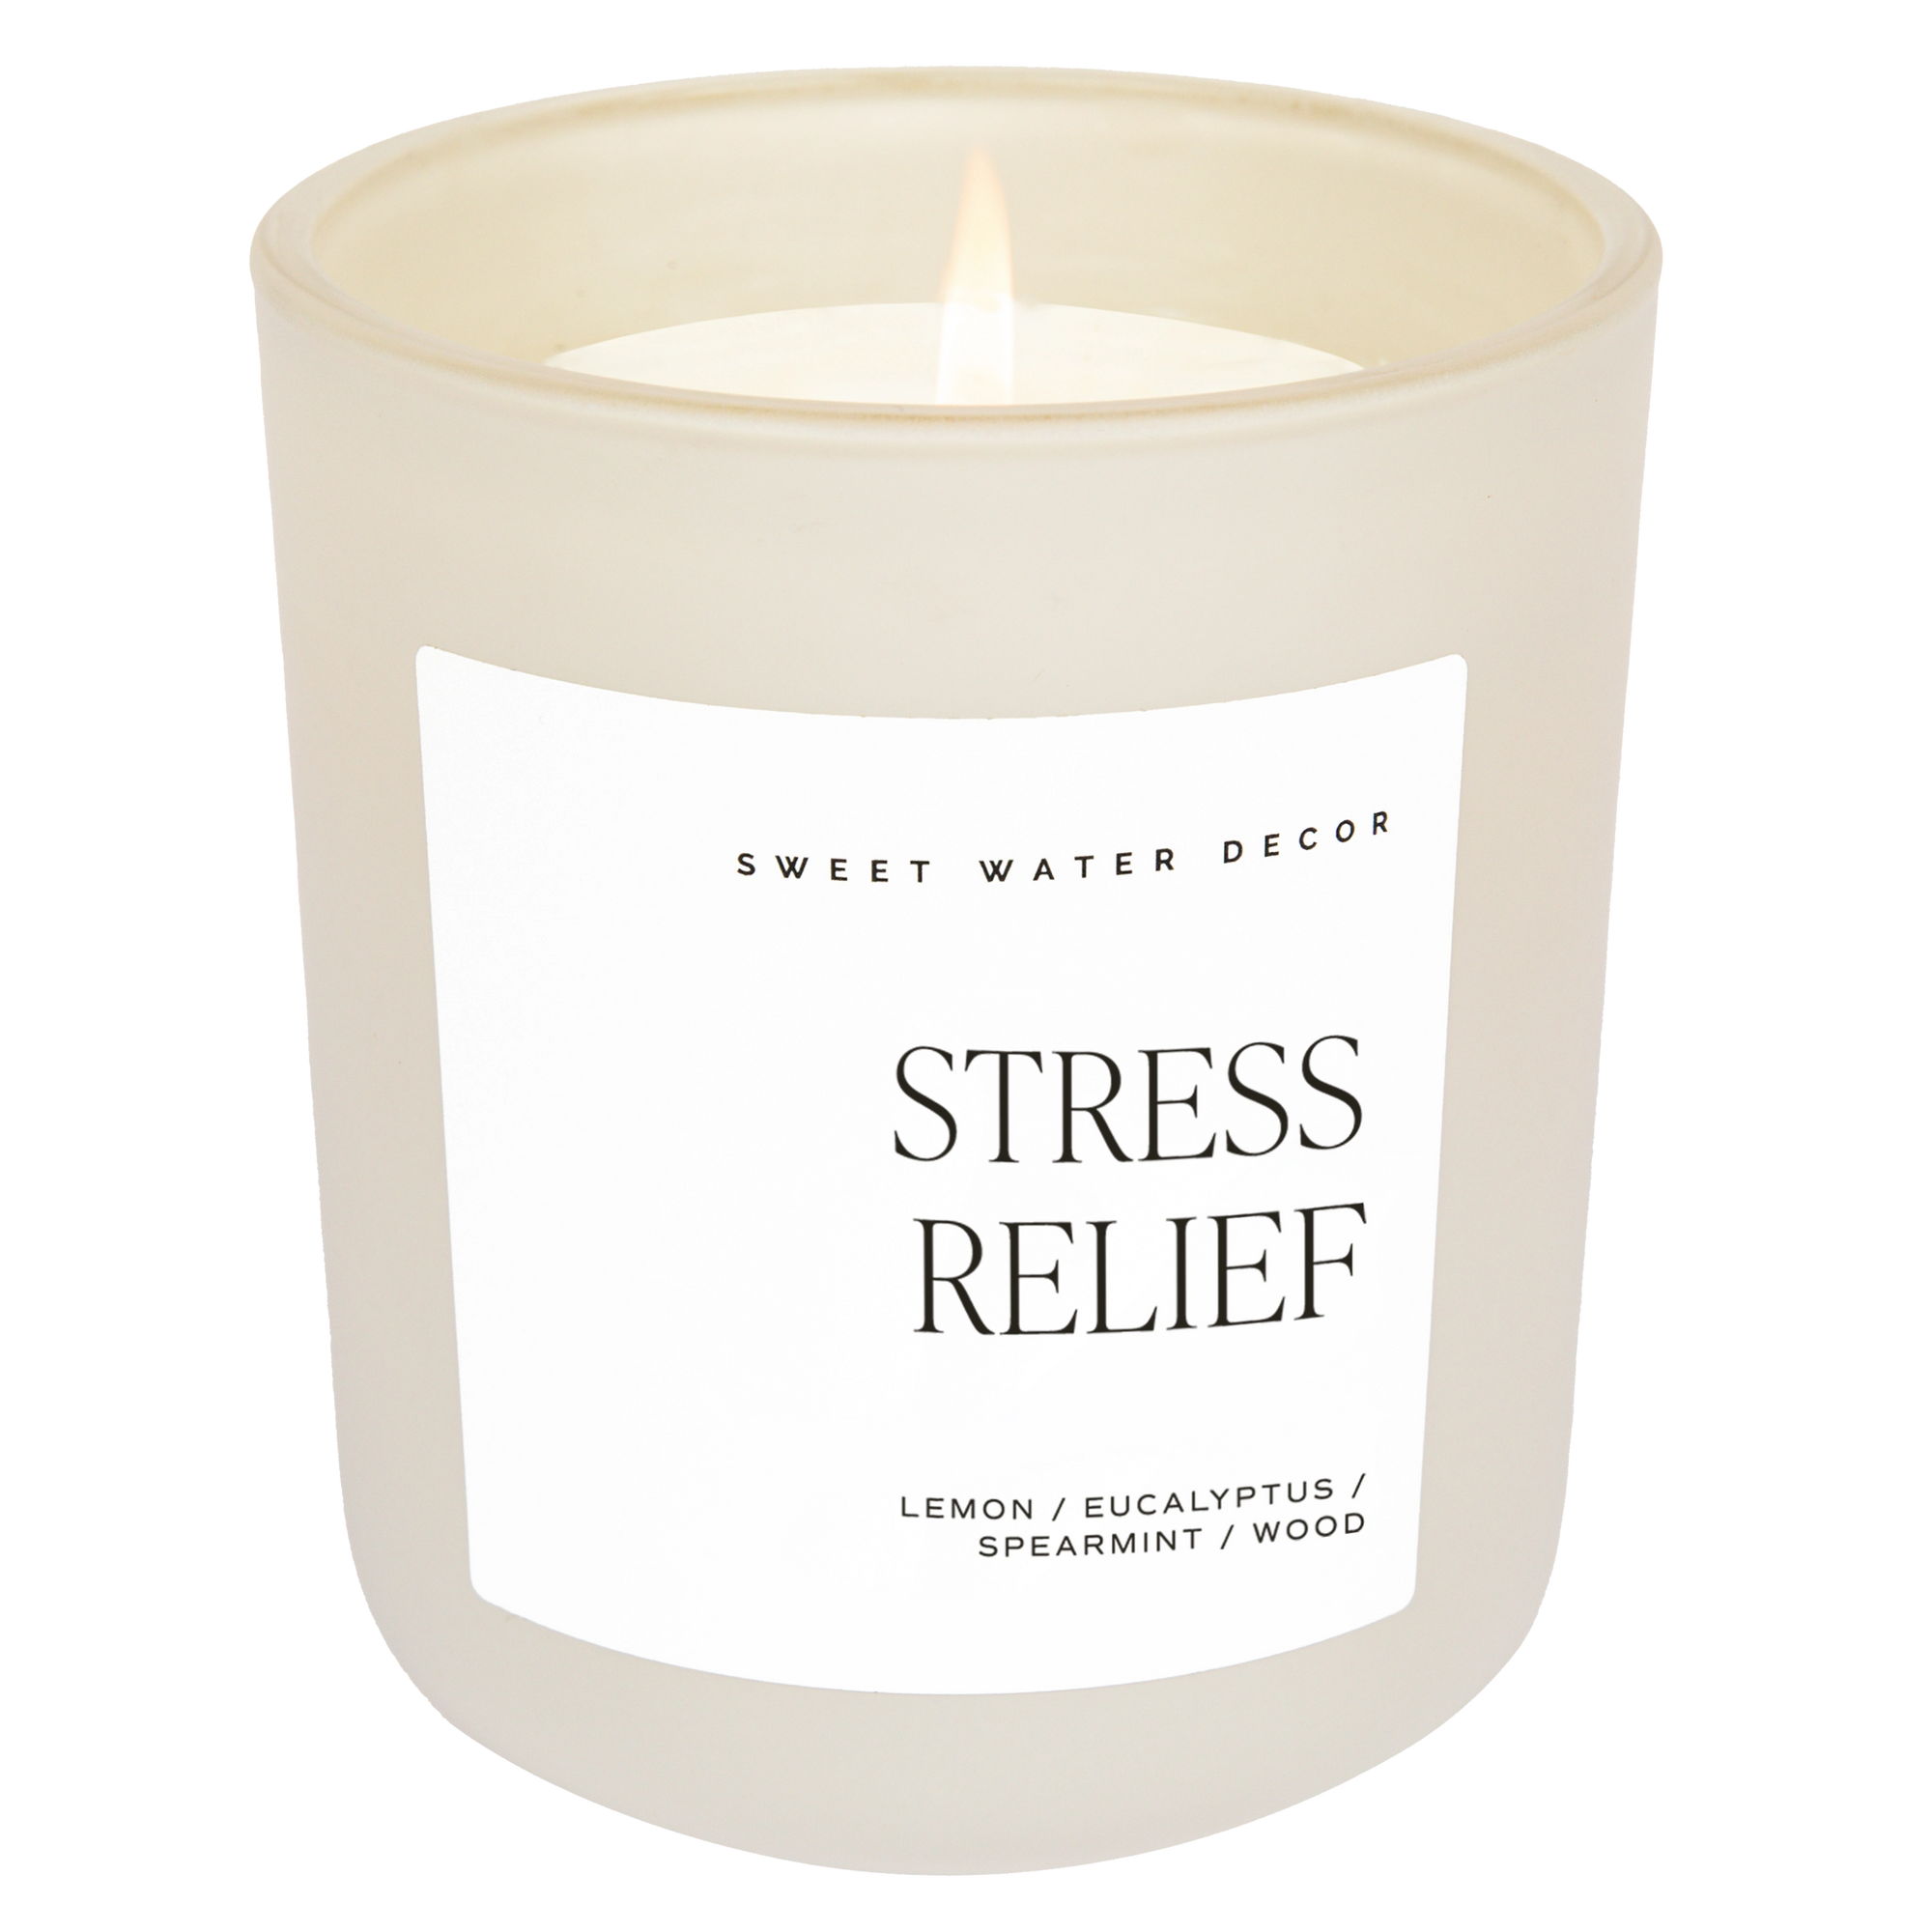 Stress relief soy candle in white jar.